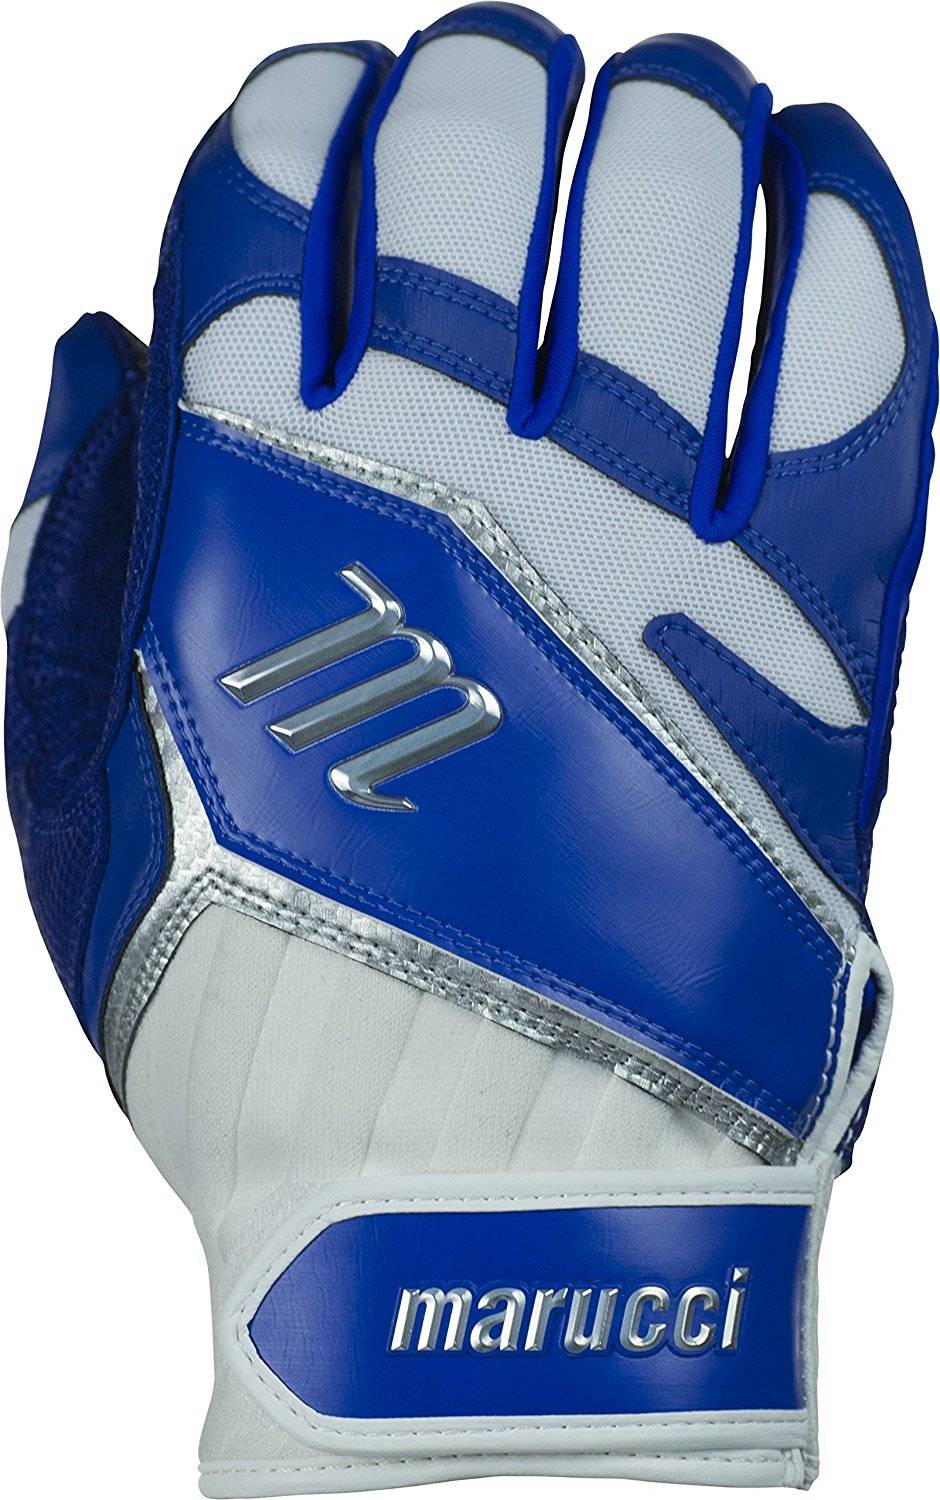 top rated batting gloves